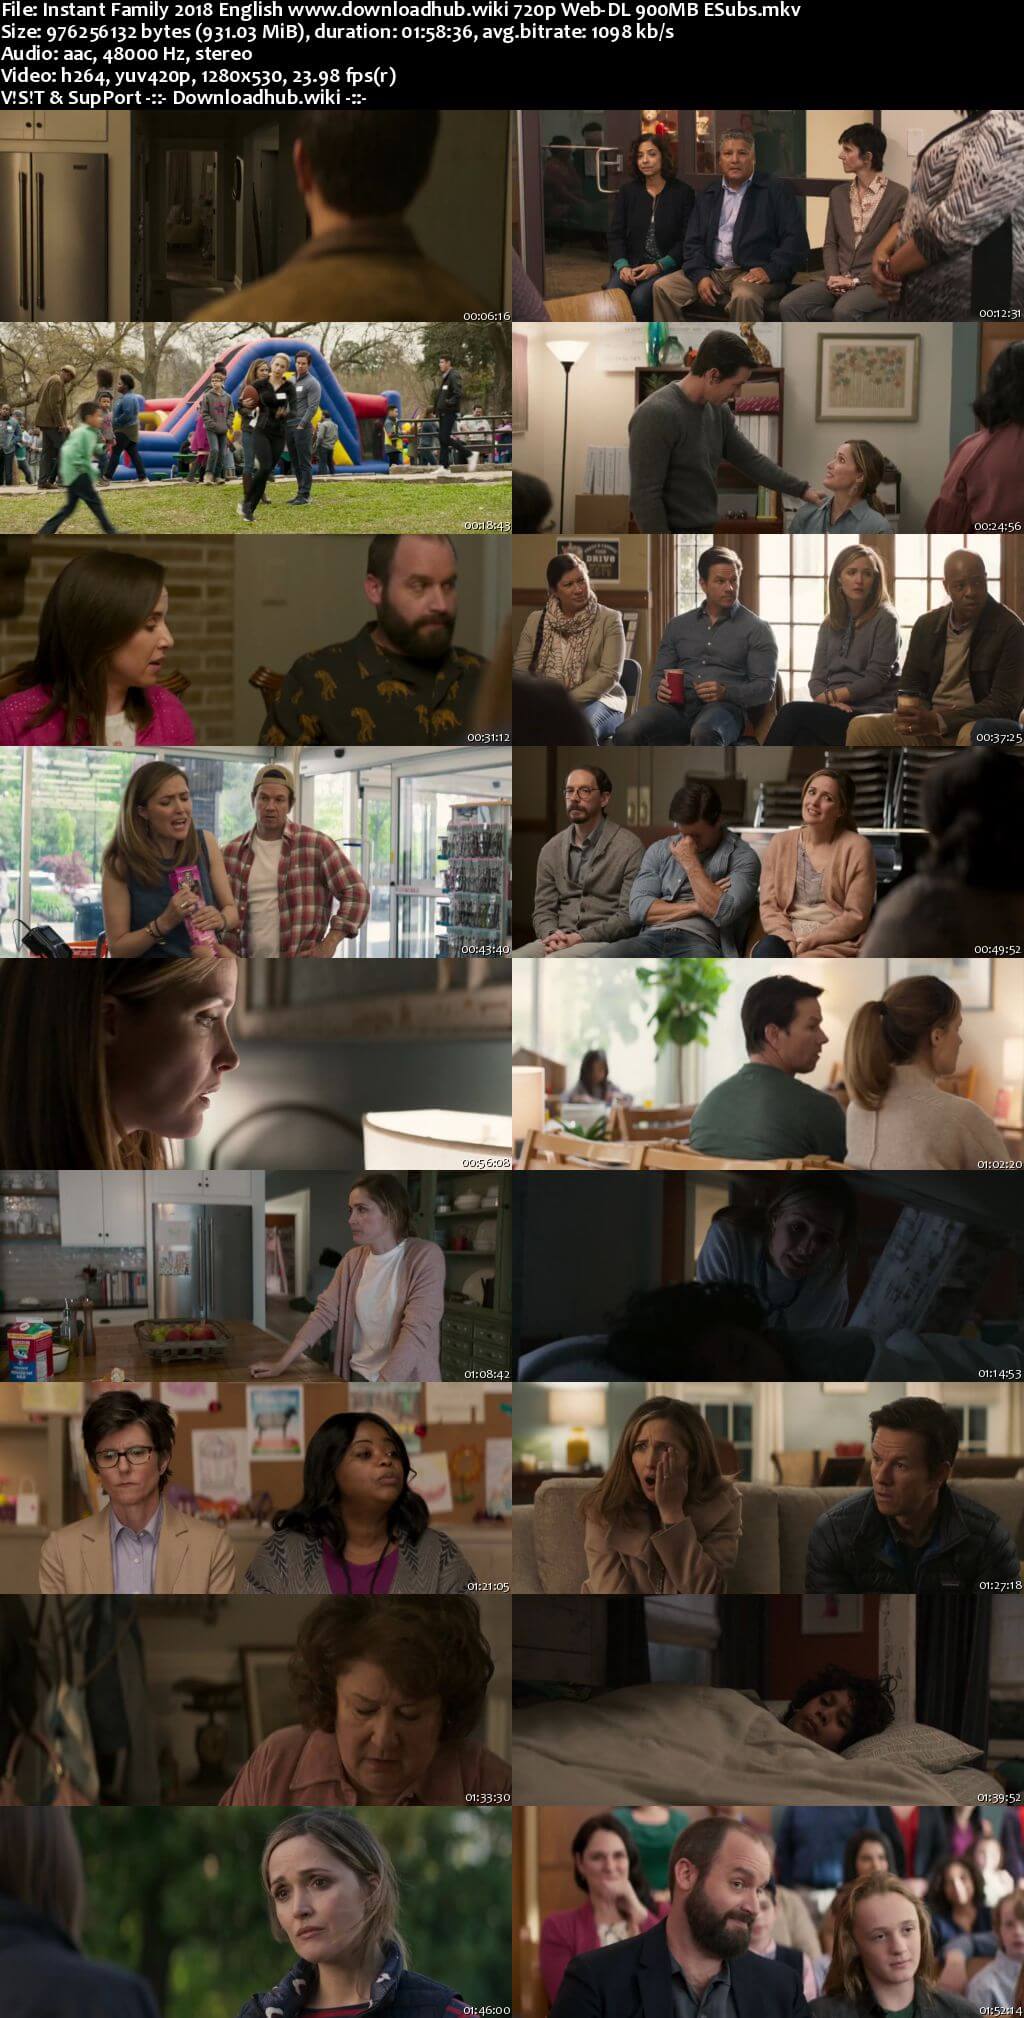 Instant Family 2018 English 720p Web-DL 900MB ESubs